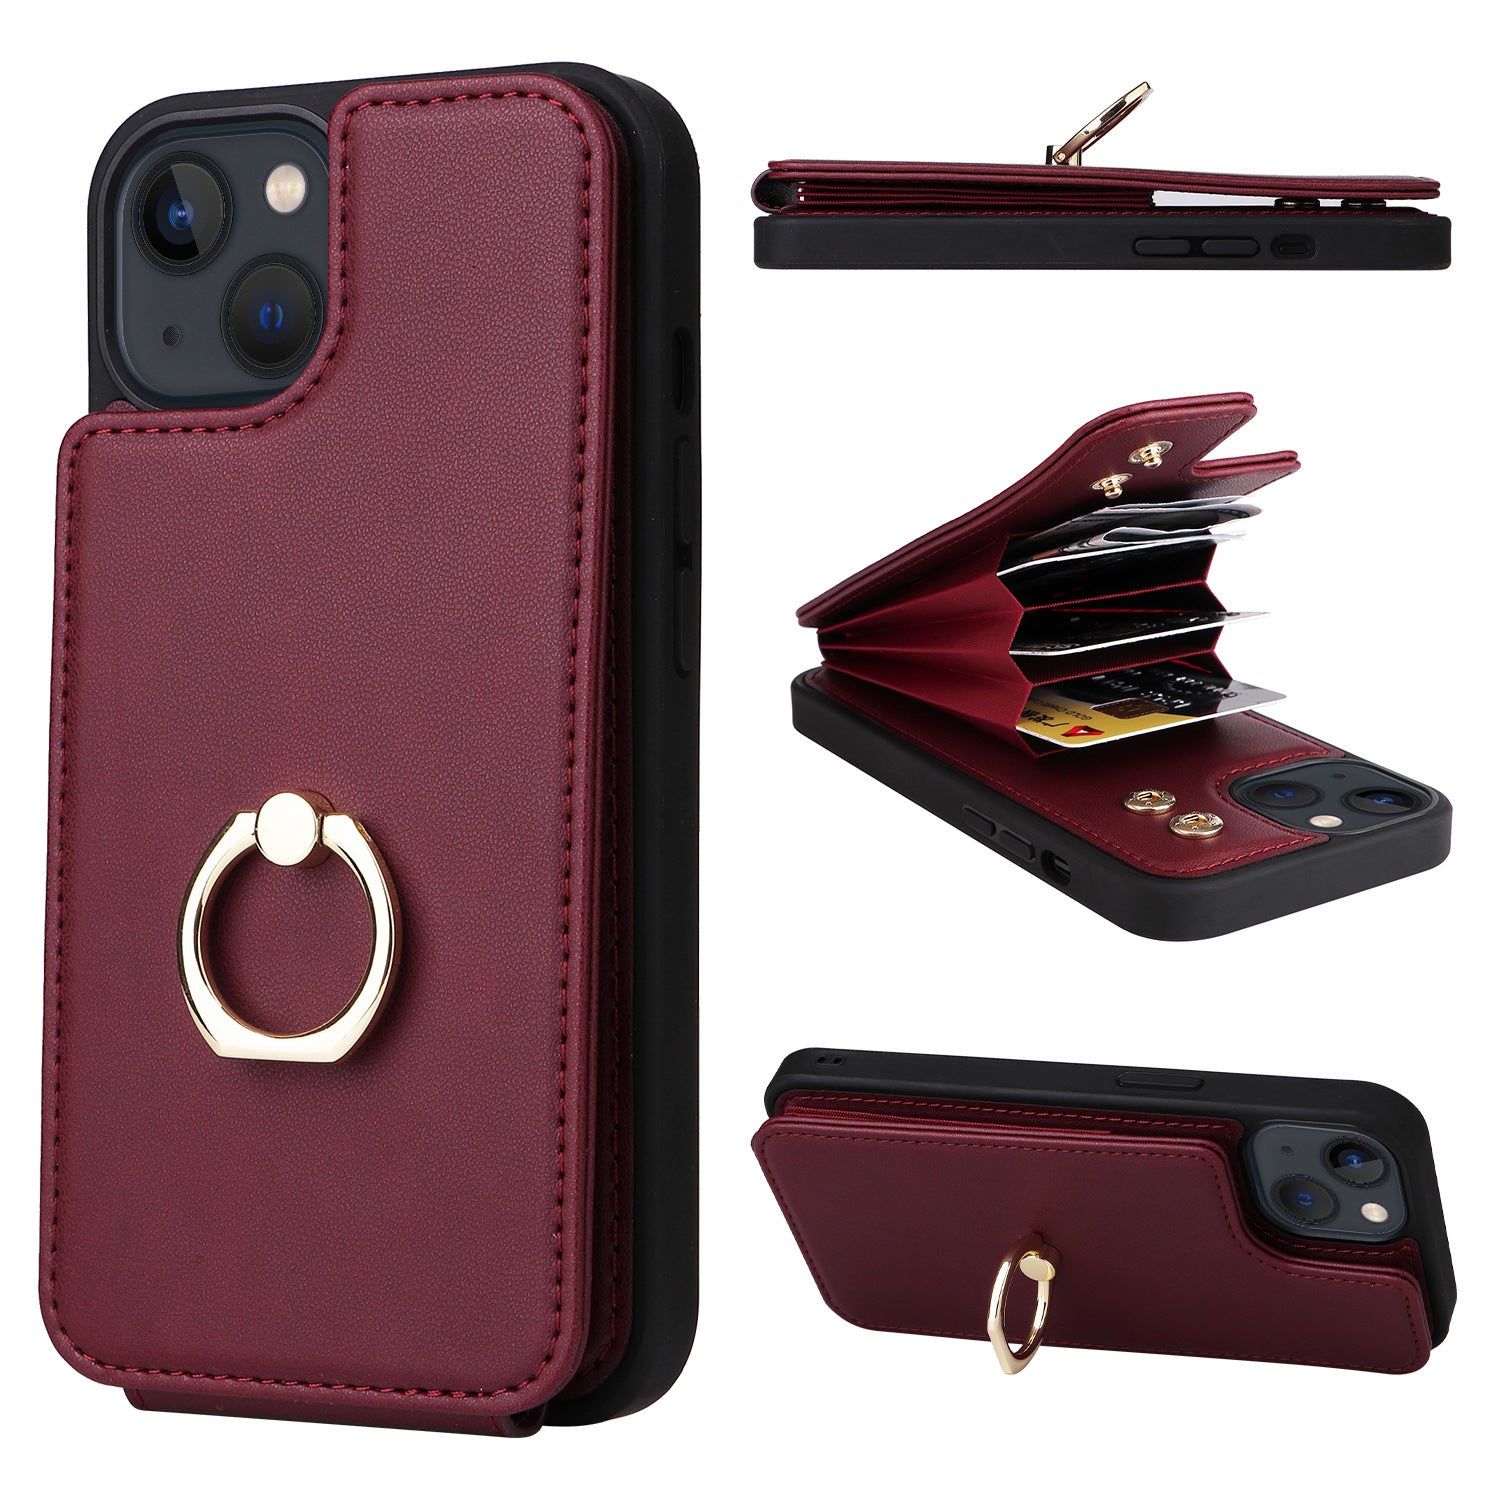 Handmade Leather Multi Folding Wallet Case for iPhone